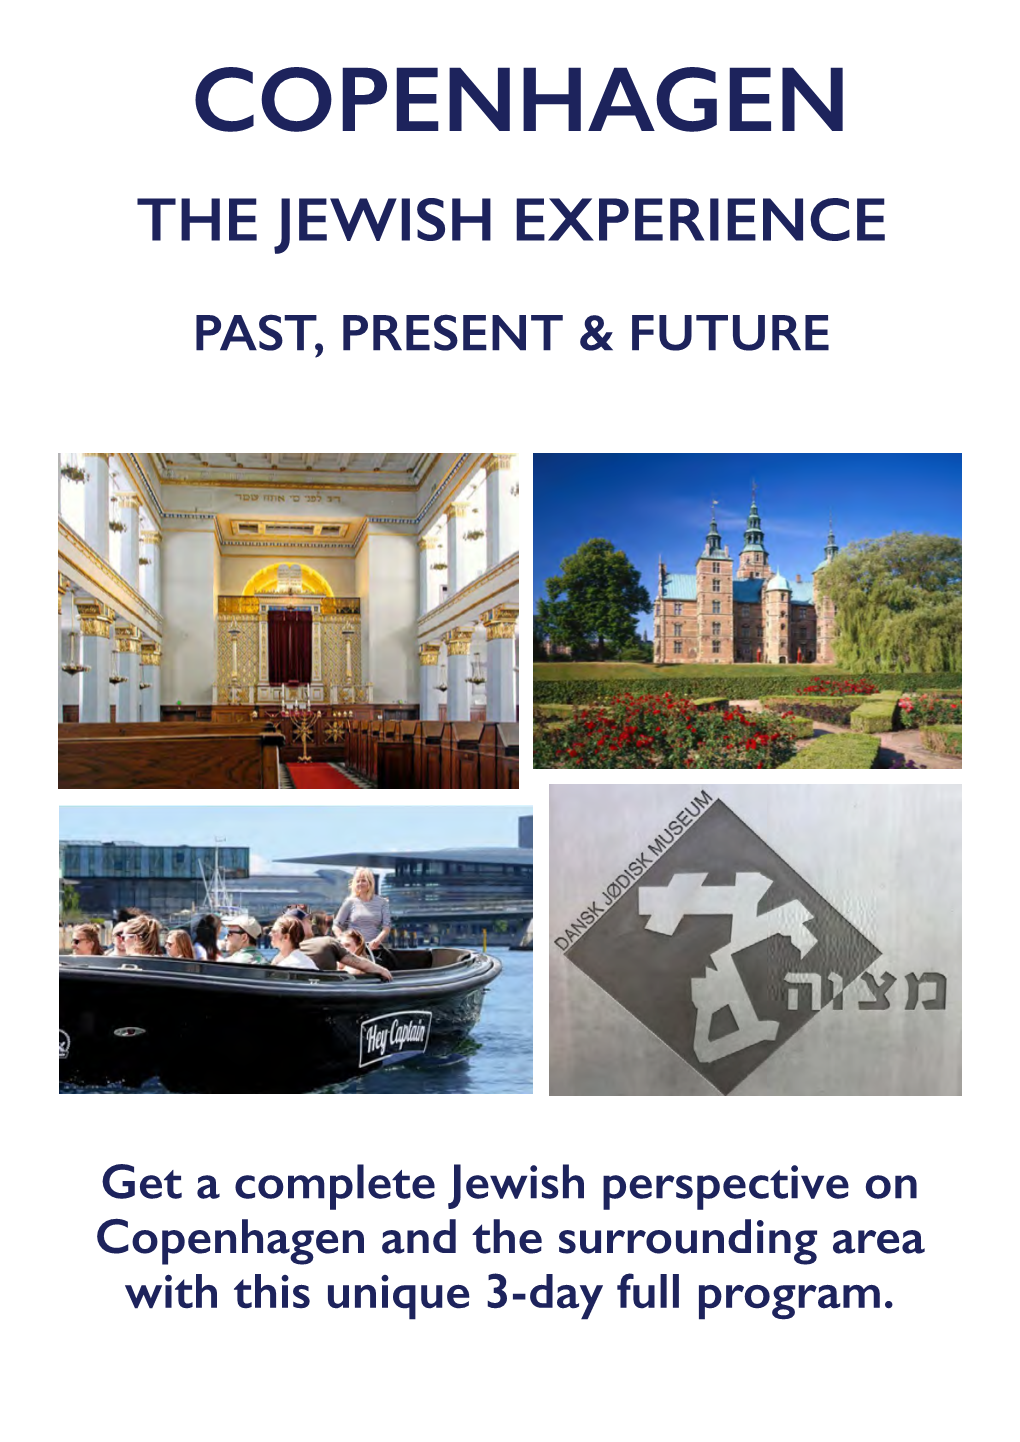 Jewish Copenhagen Only Uses the Best Local Jewish Guides As Well As Suppliers of the Highest Available Standard